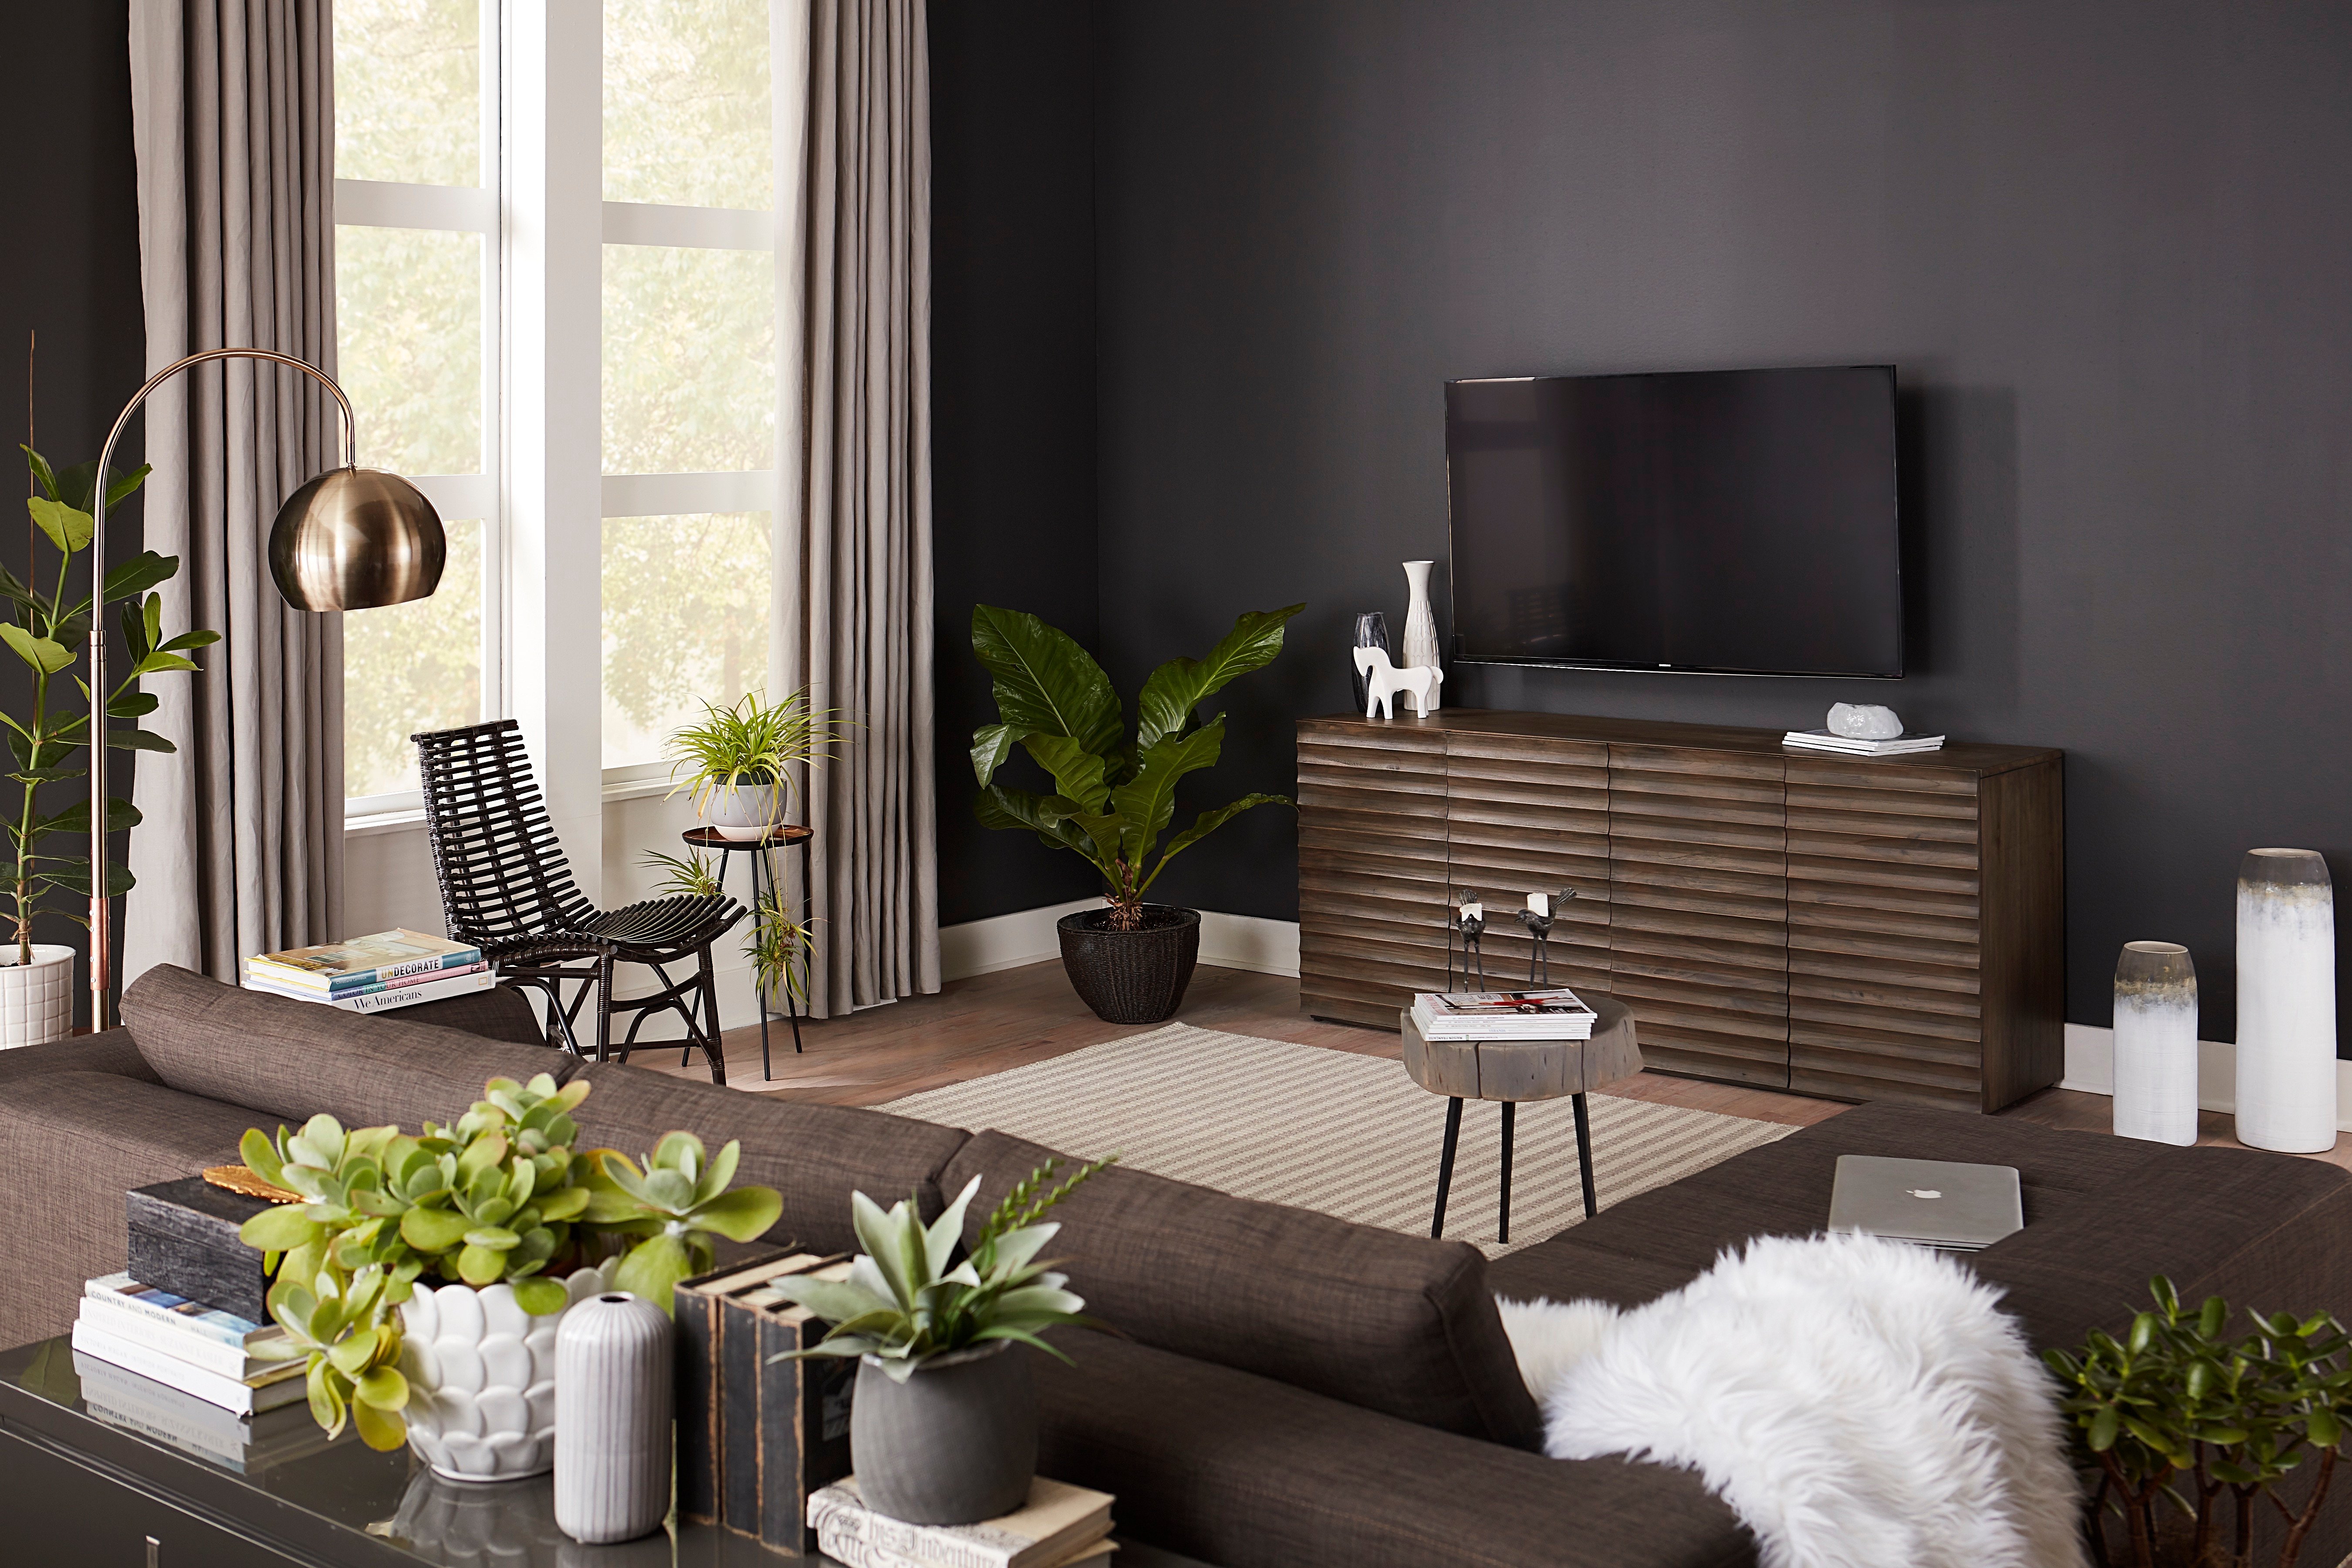 Why Your Tv Wall Is Practically Made For The Dark Wall Trend,Traditional Classic Kitchen Cabinet Colors